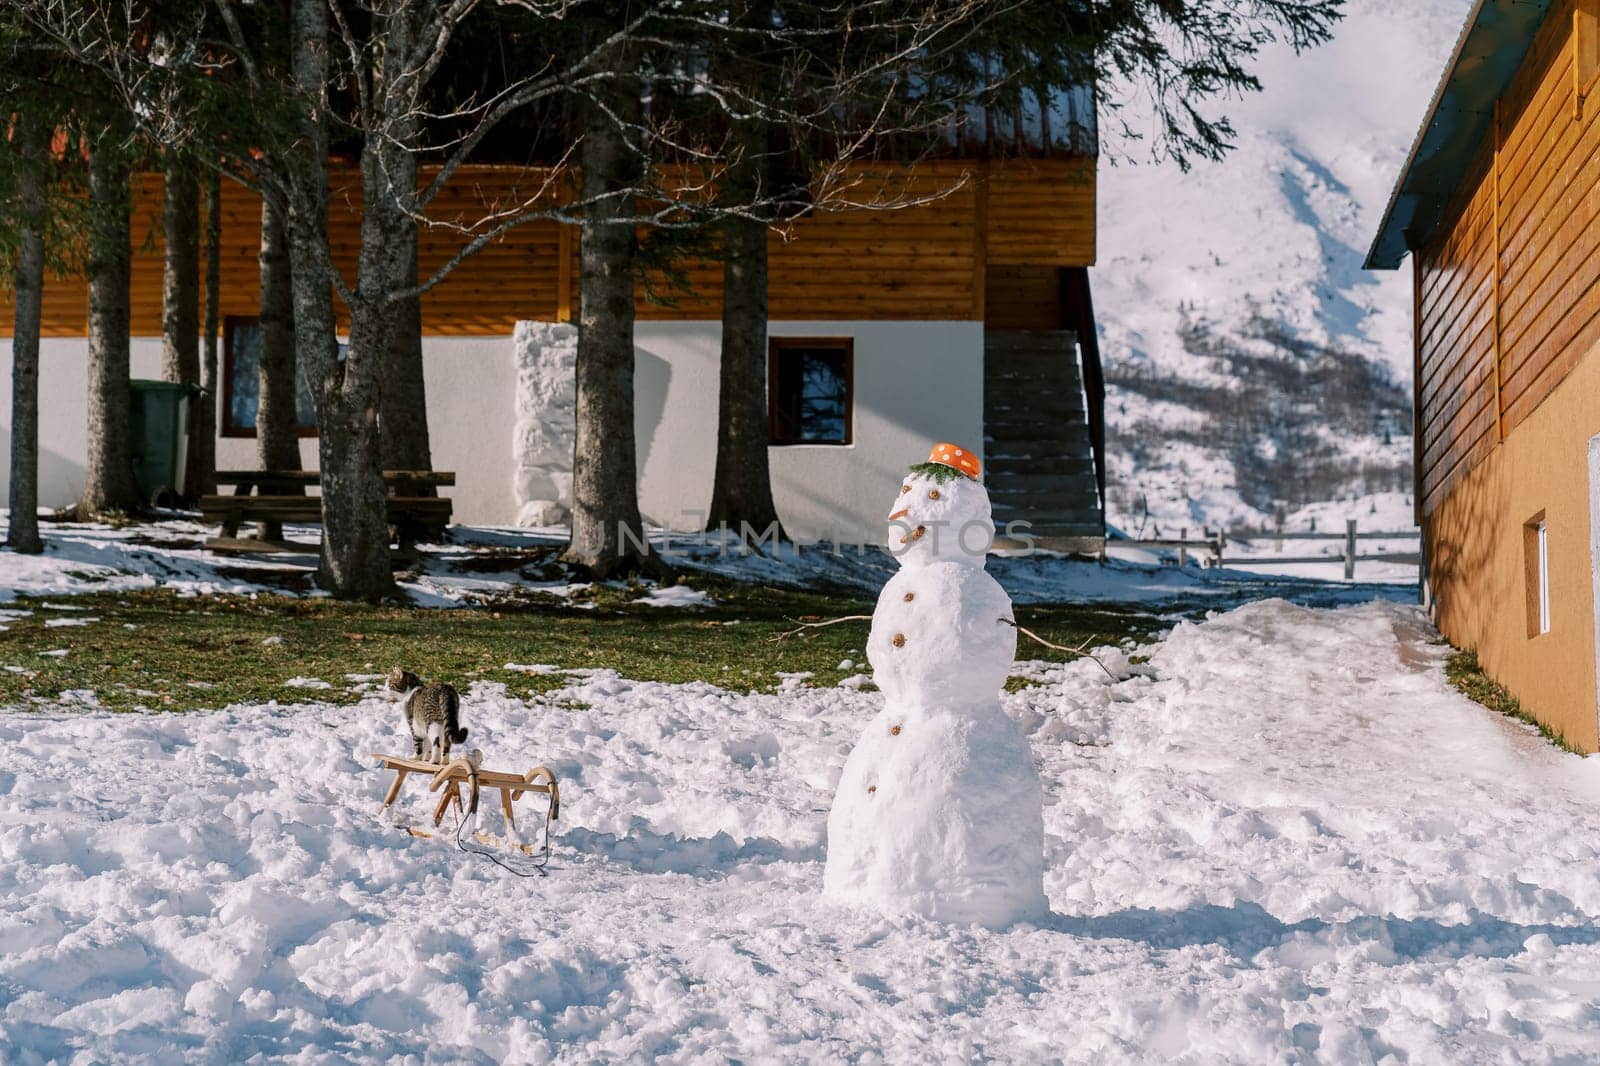 Tabby cat stands on a sled next to a snowman in the courtyard of a wooden chalet and looks into the distance by Nadtochiy